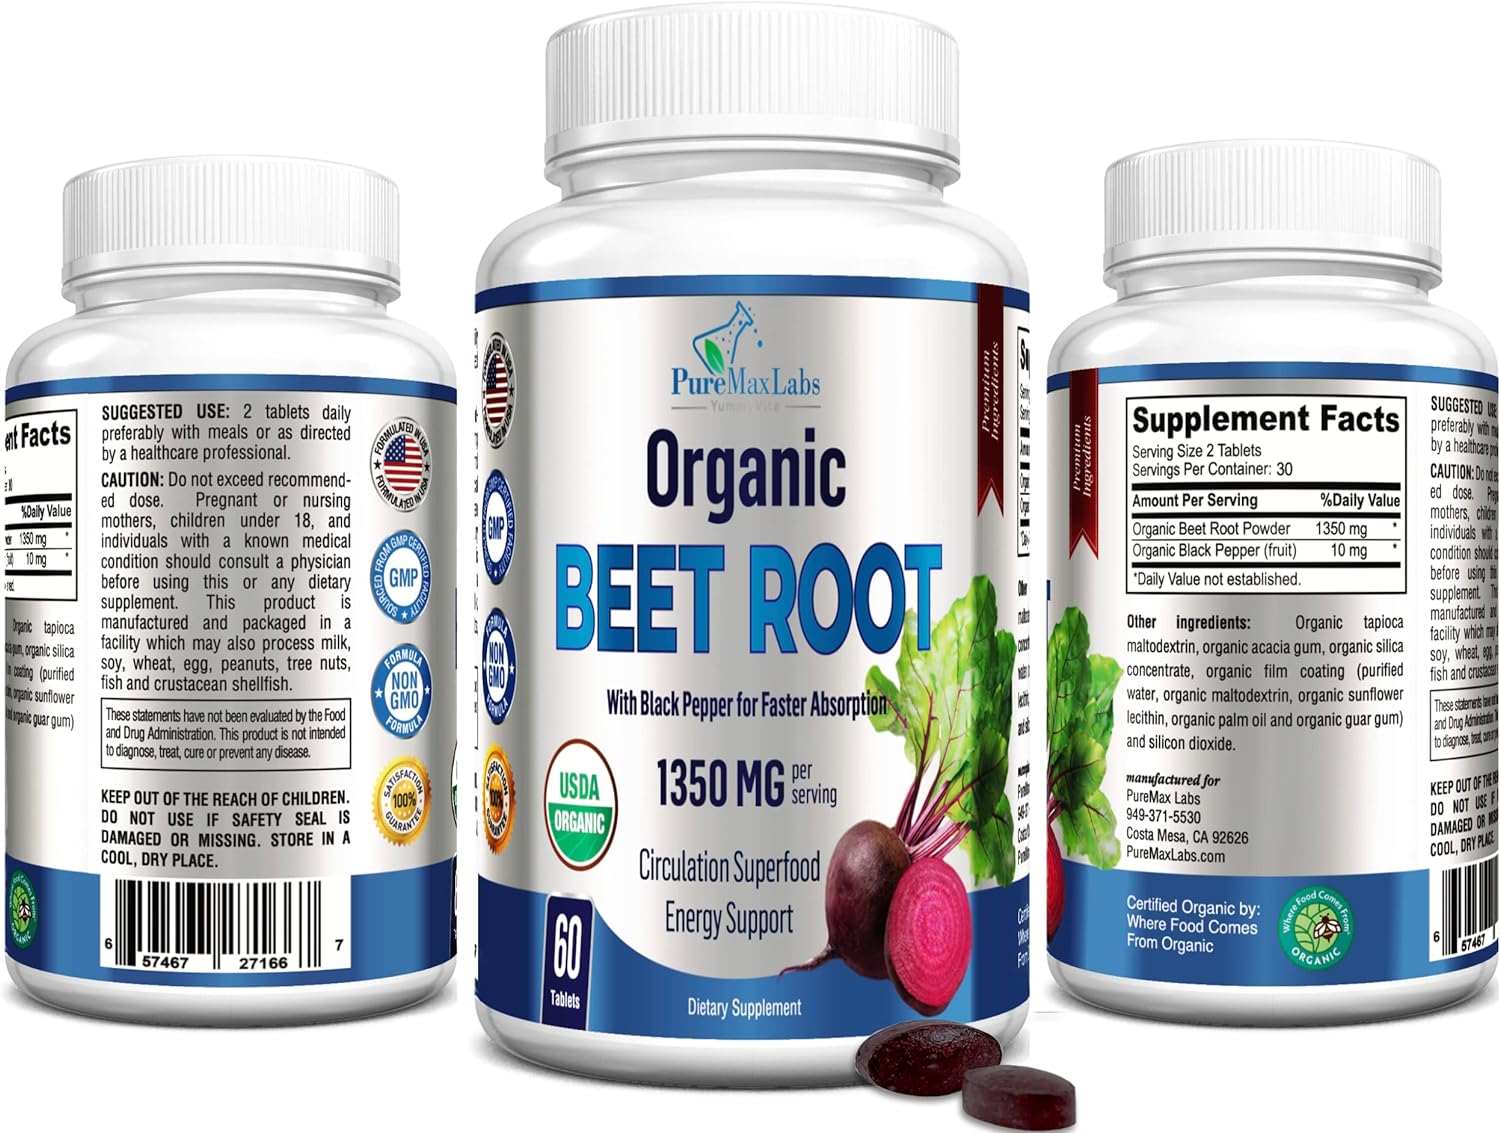 YUMMYVITE Organic Beet Root Powder Tablets - 1350mg with Black Pepper for Faster Absorption - Boosts Nitric Oxide for Energy and Stamina - 60 Tablets : Health & Household